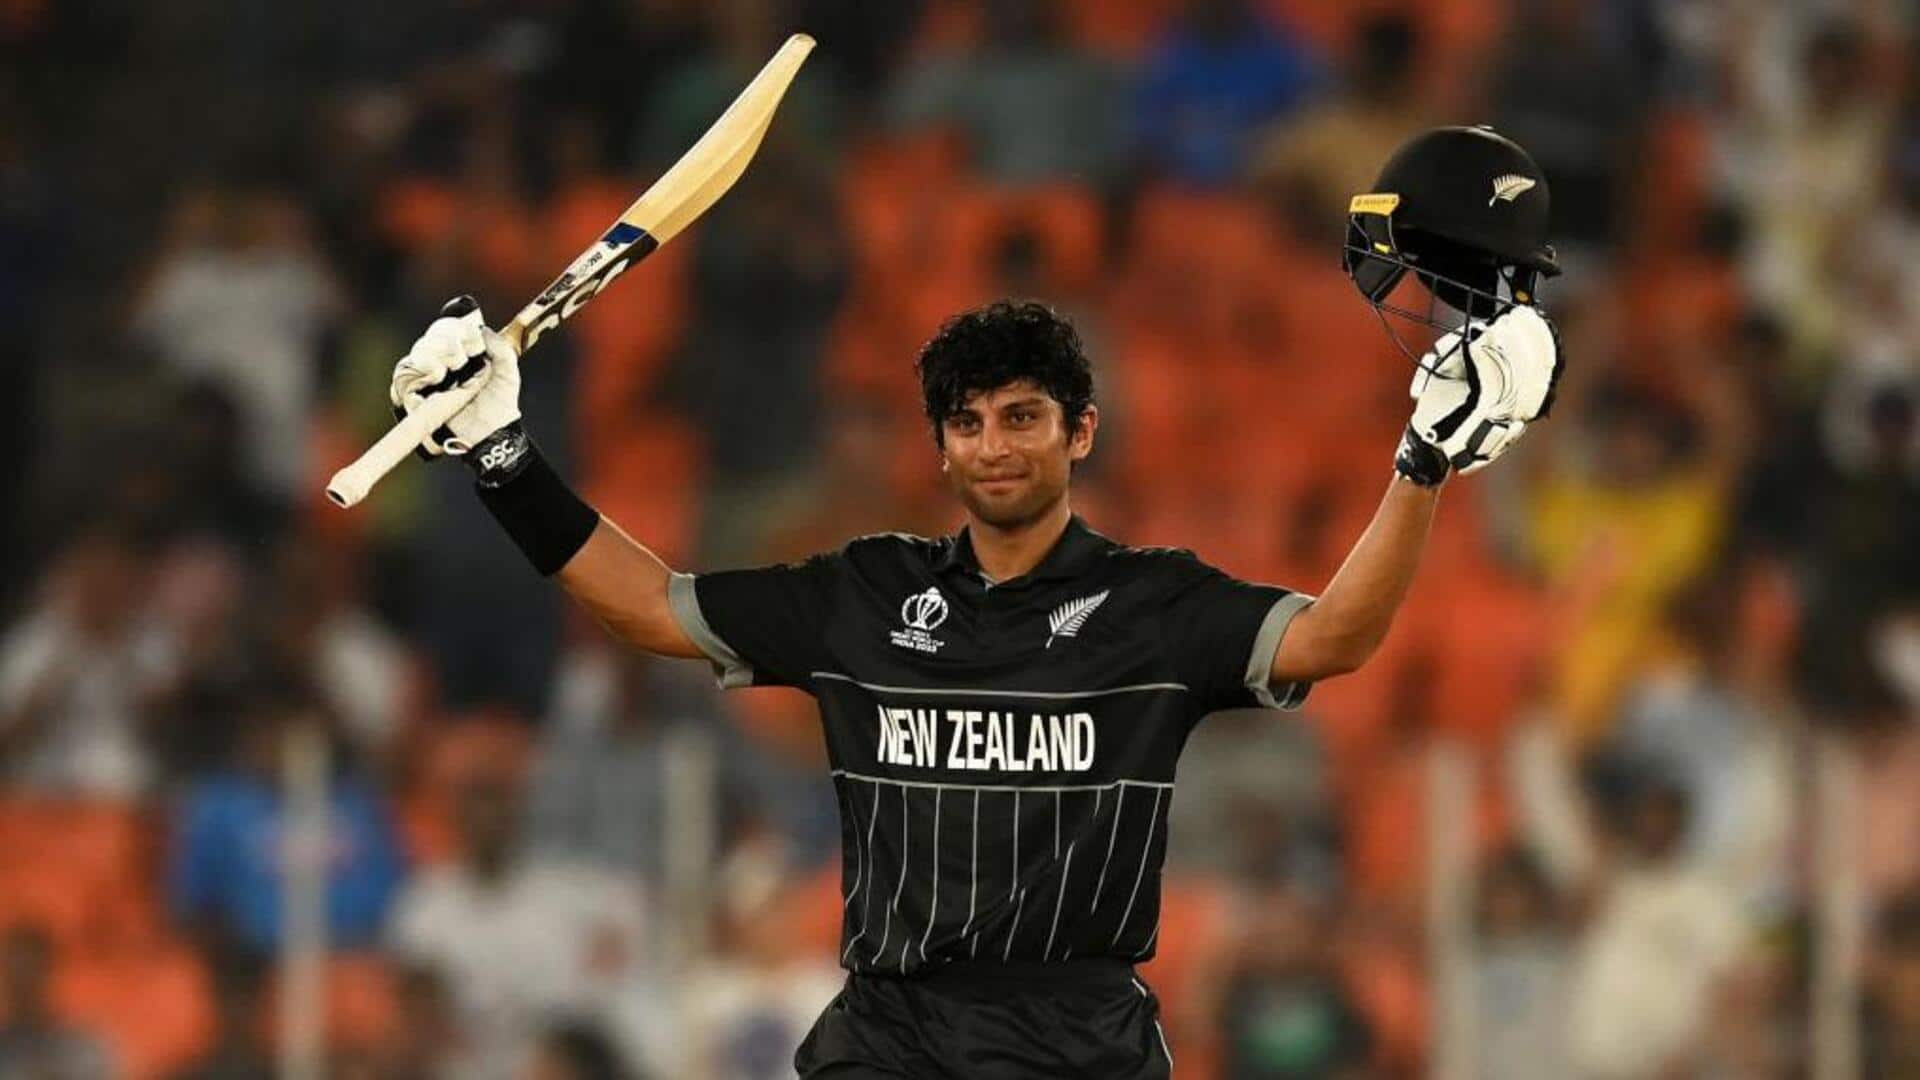 Rachin Ravindra equals this World Cup record of Kane Williamson